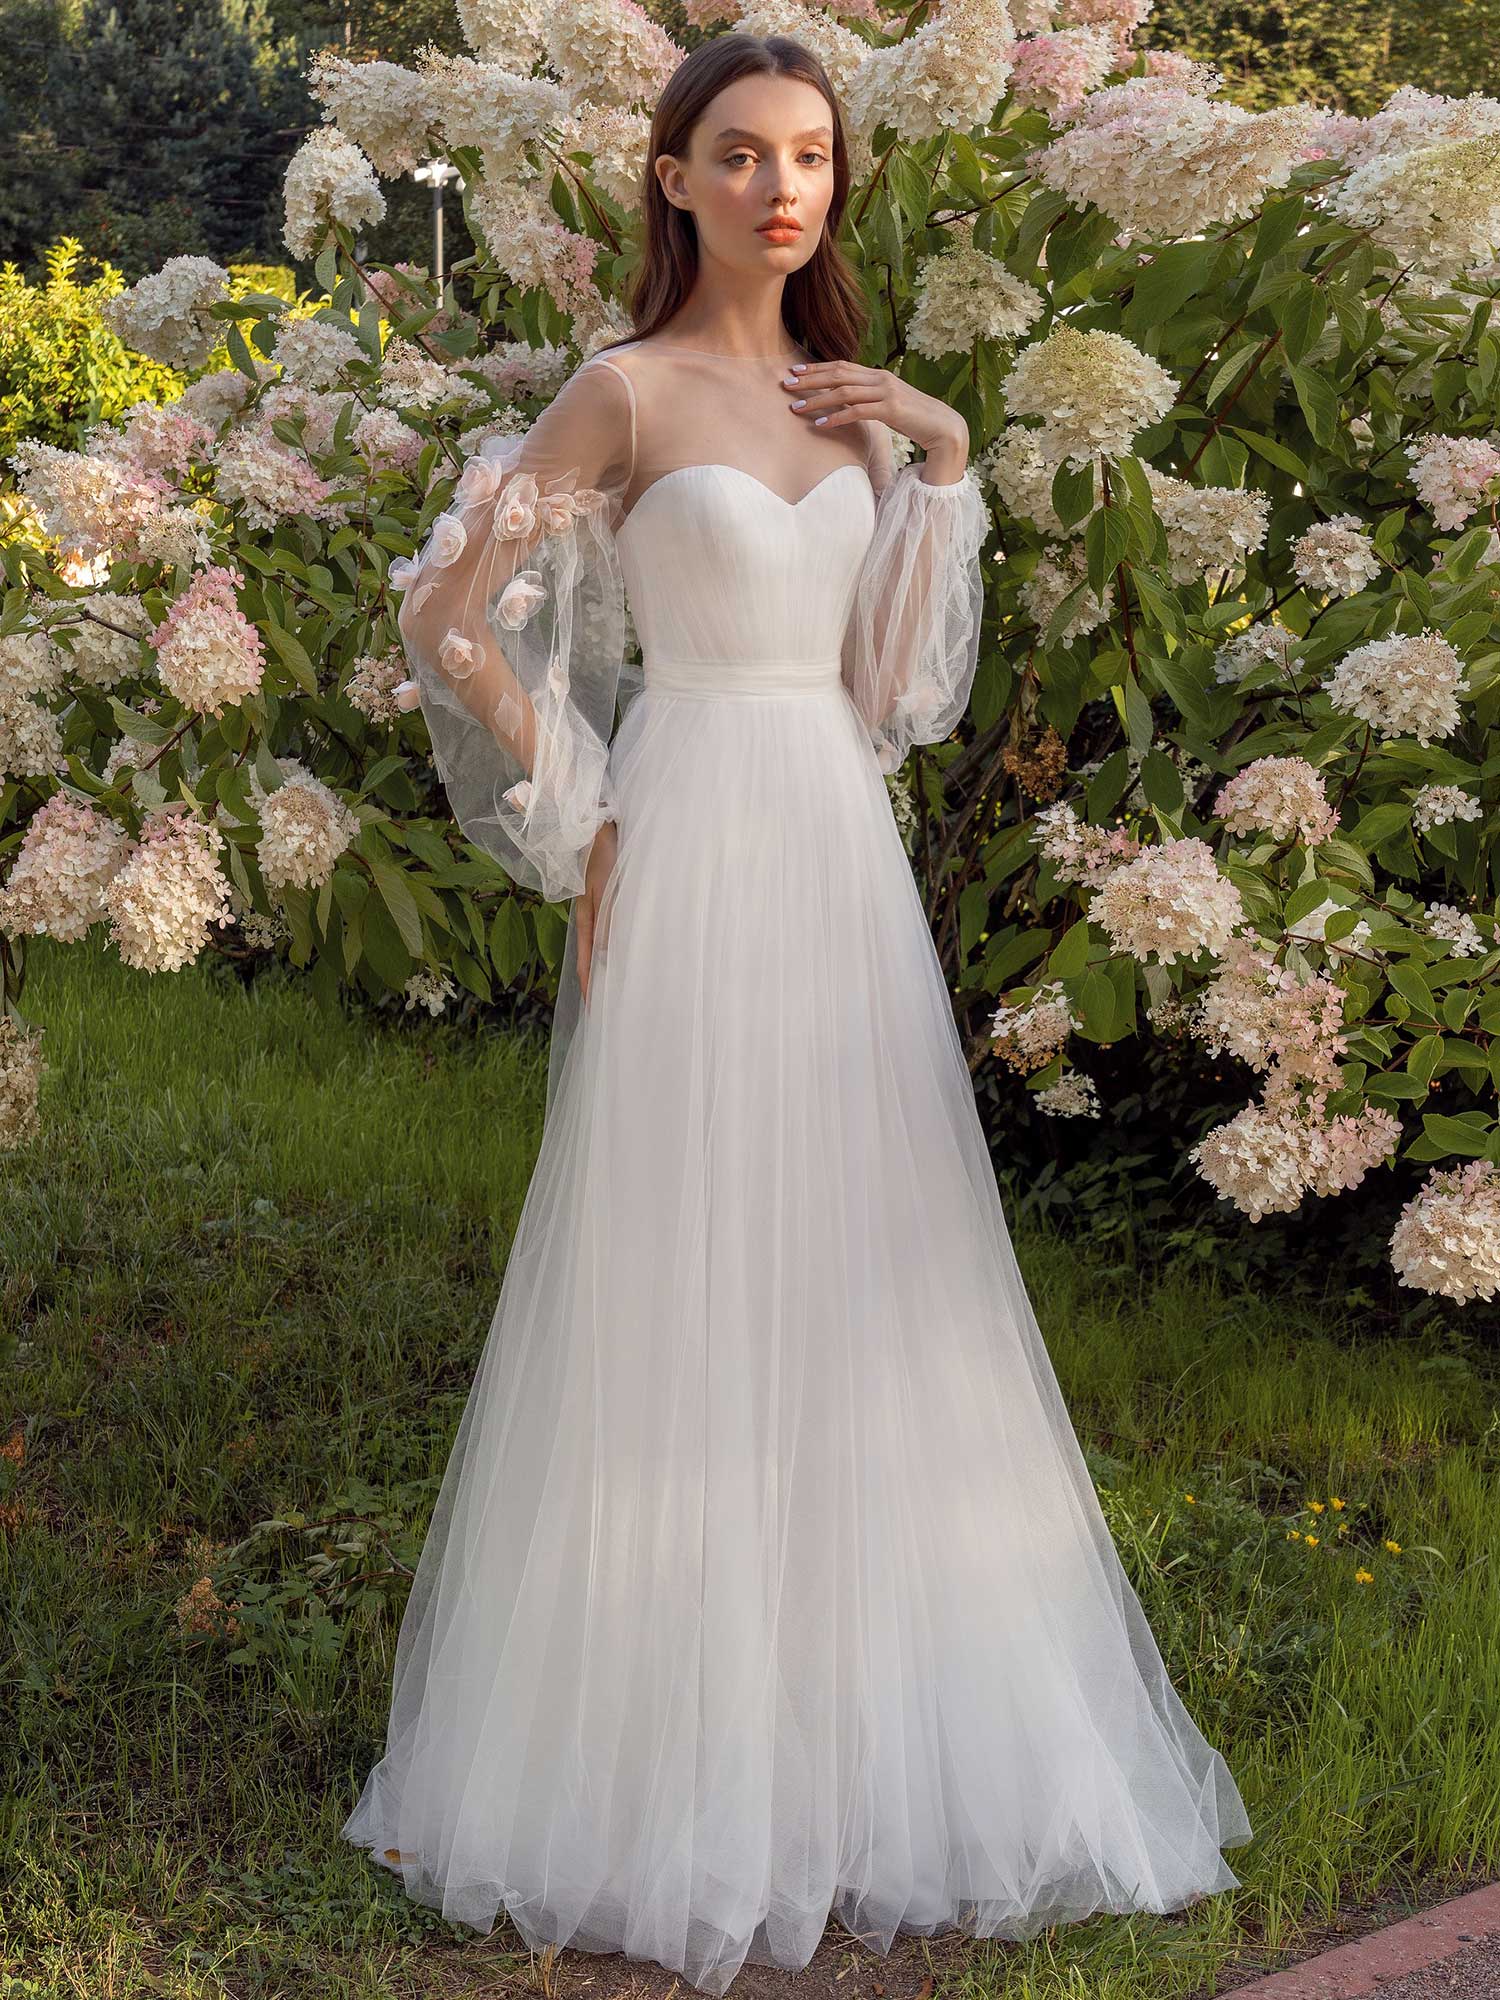 Floral Wedding Dresses With Sleeves Best 10 - Find the Perfect Venue ...